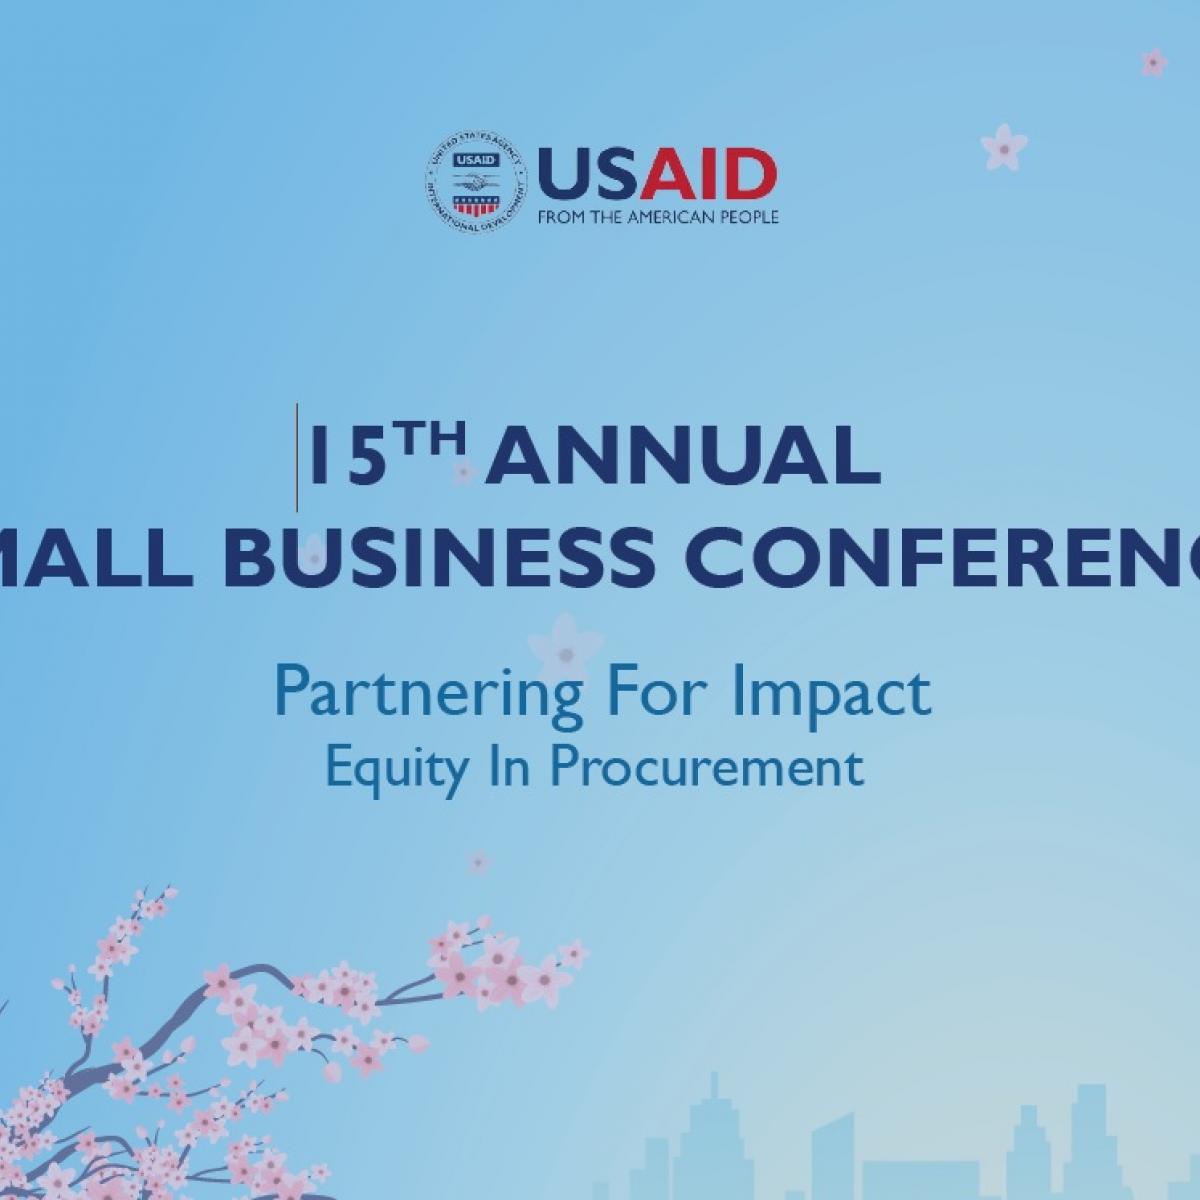 Decorative image used to announce the 15th Annual Small Business Conference